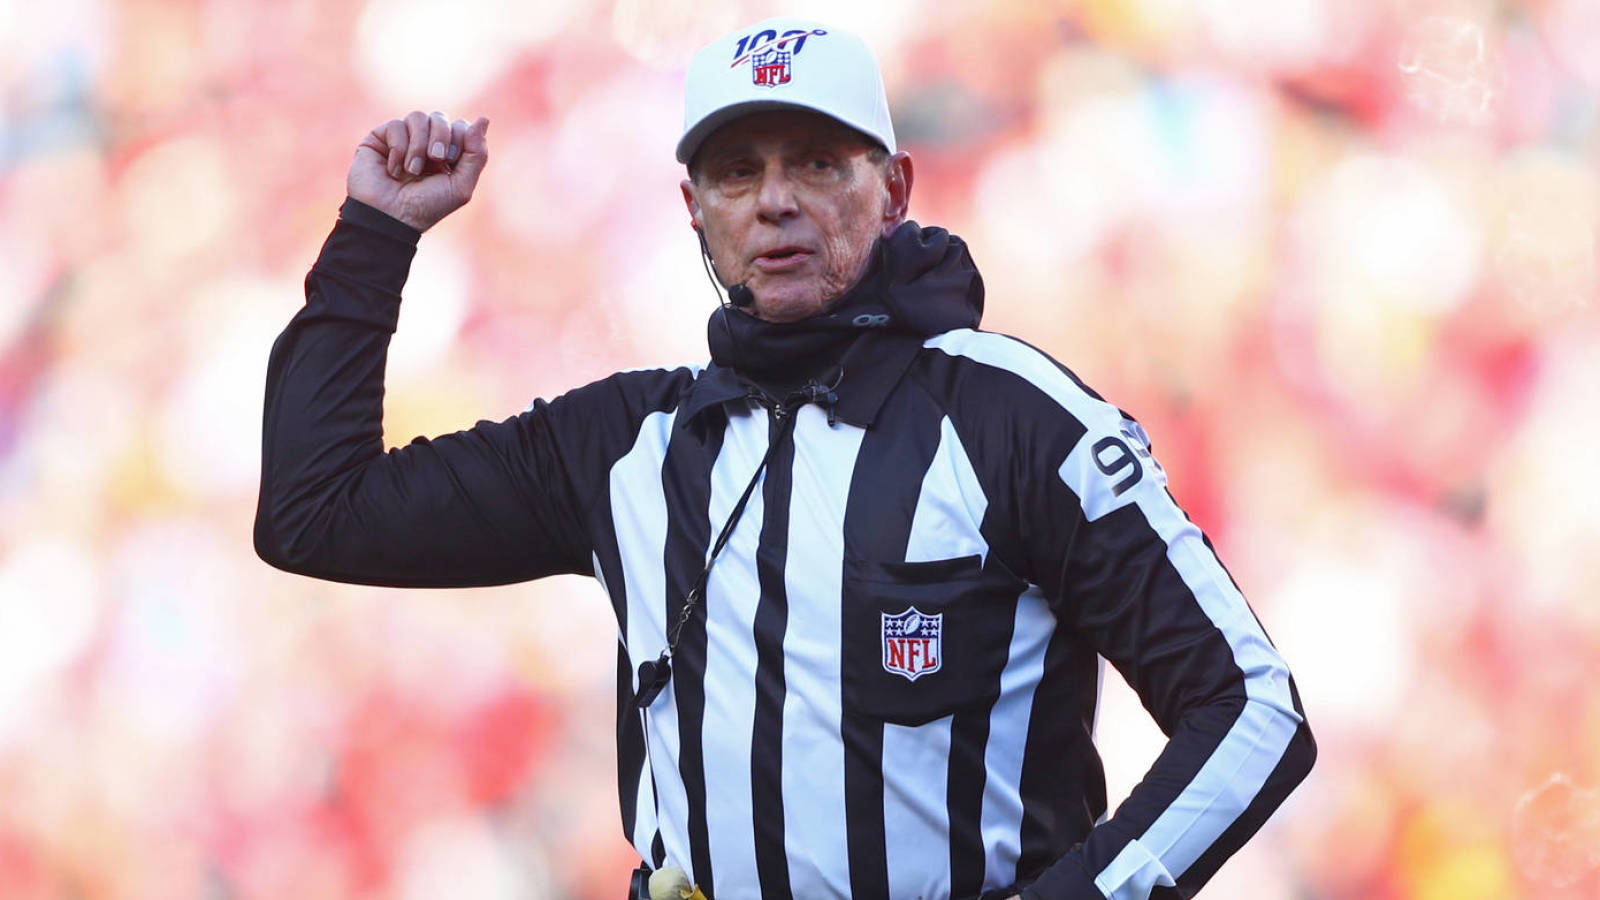 Referee Tony Corrente explains crucial taunting penalty on Bears